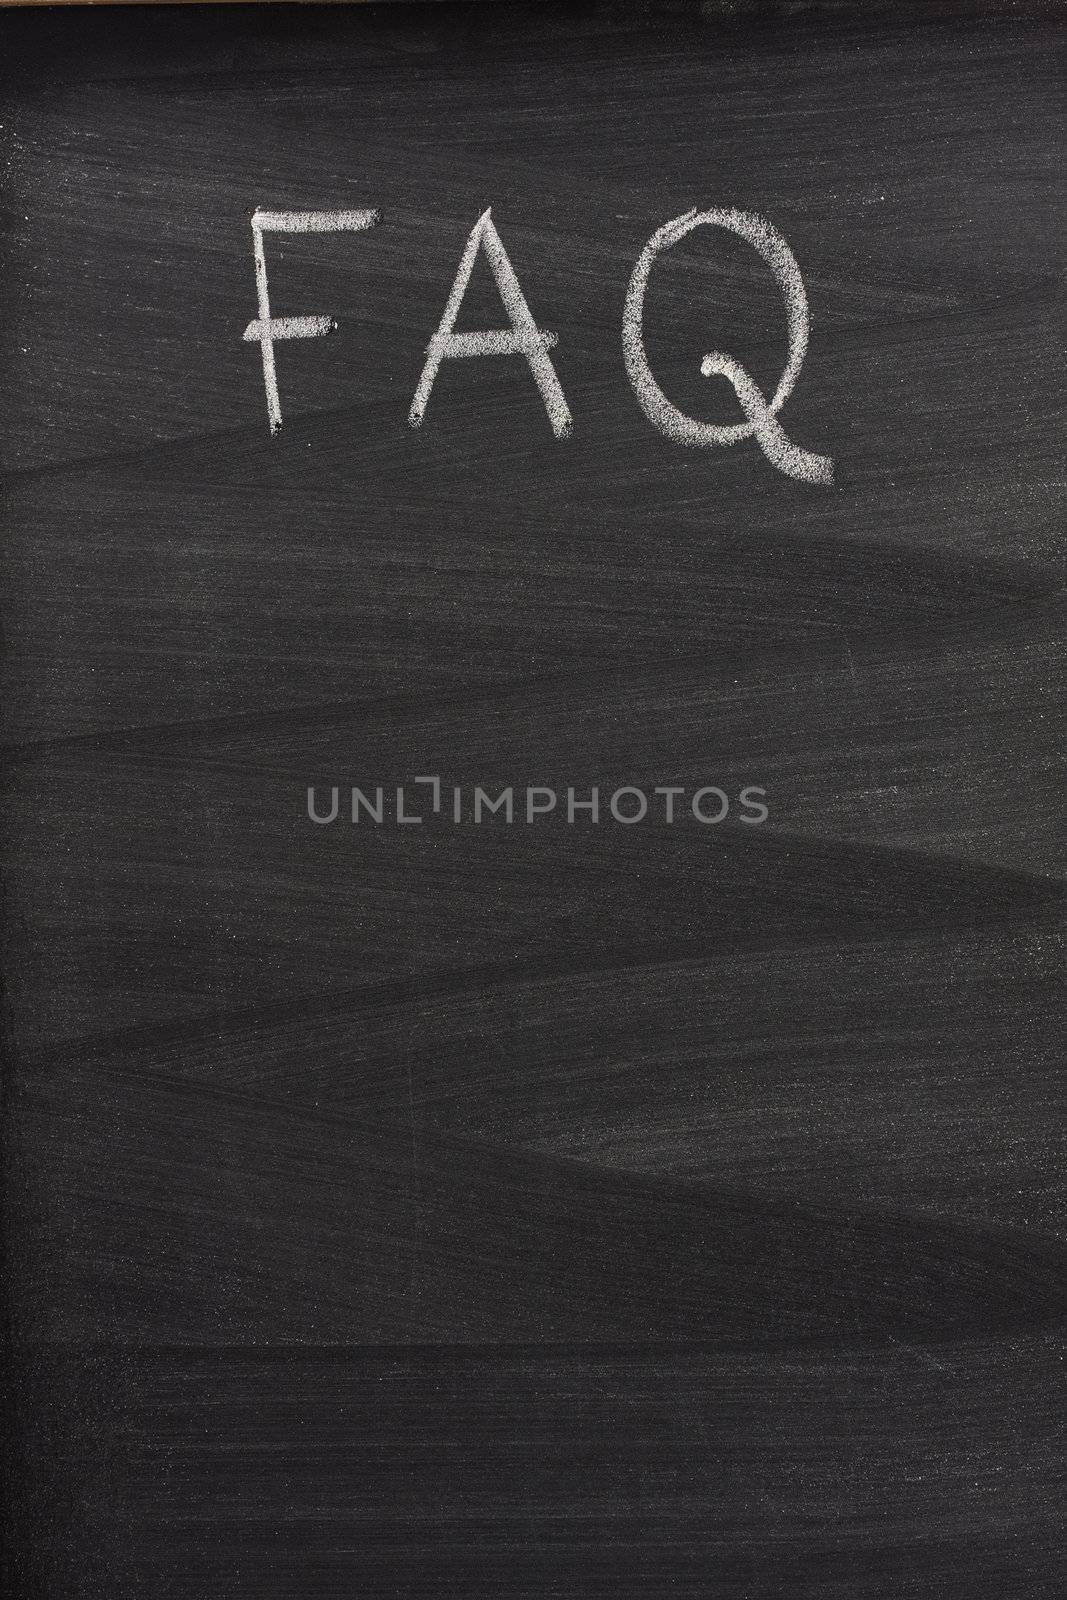 FAQ - frequently asked questions title handritten with white chalk on a blackboard with strong eraser pattern